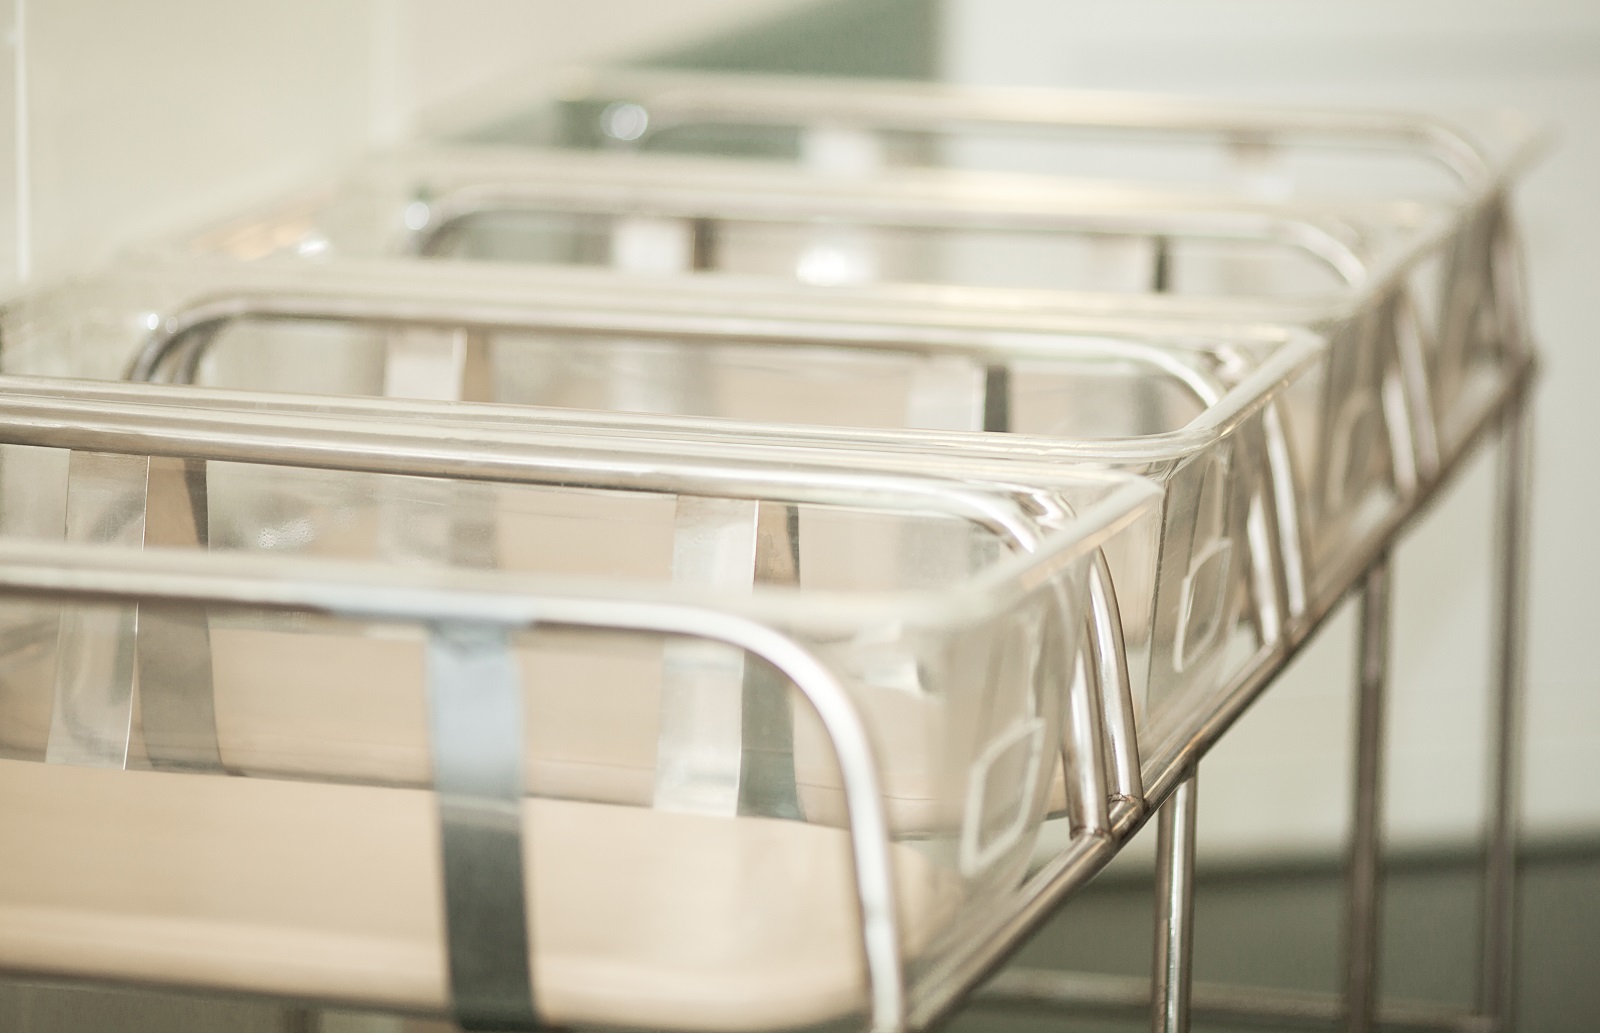 baby containers in the maternity hospital 2021 04 04 20 04 54 utc новости